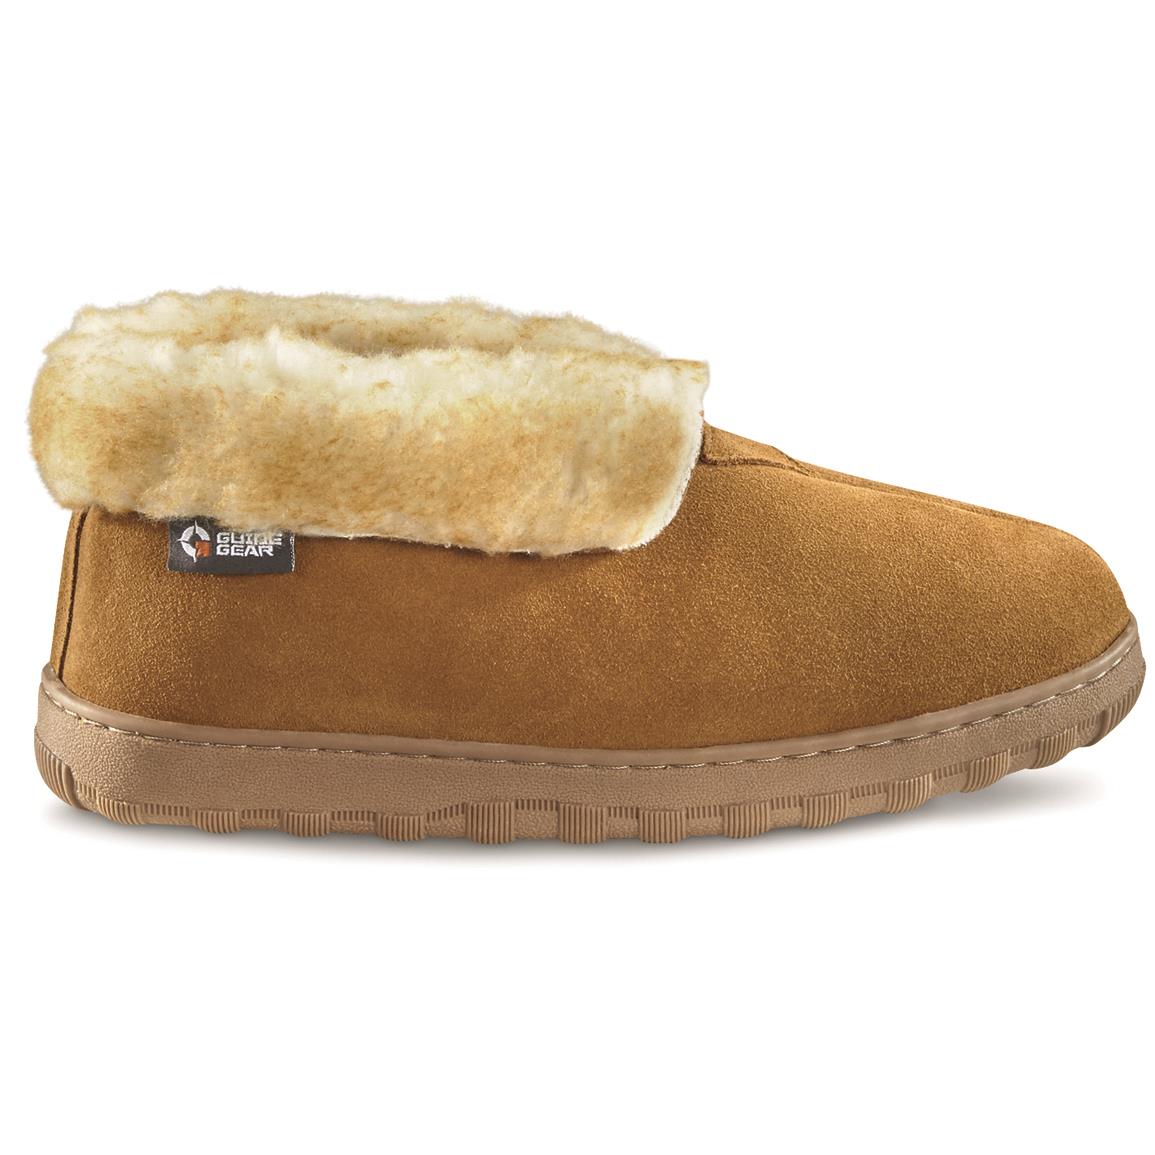 Guide Gear Men's Frontier Slippers - 718235, Slippers at Sportsman's Guide